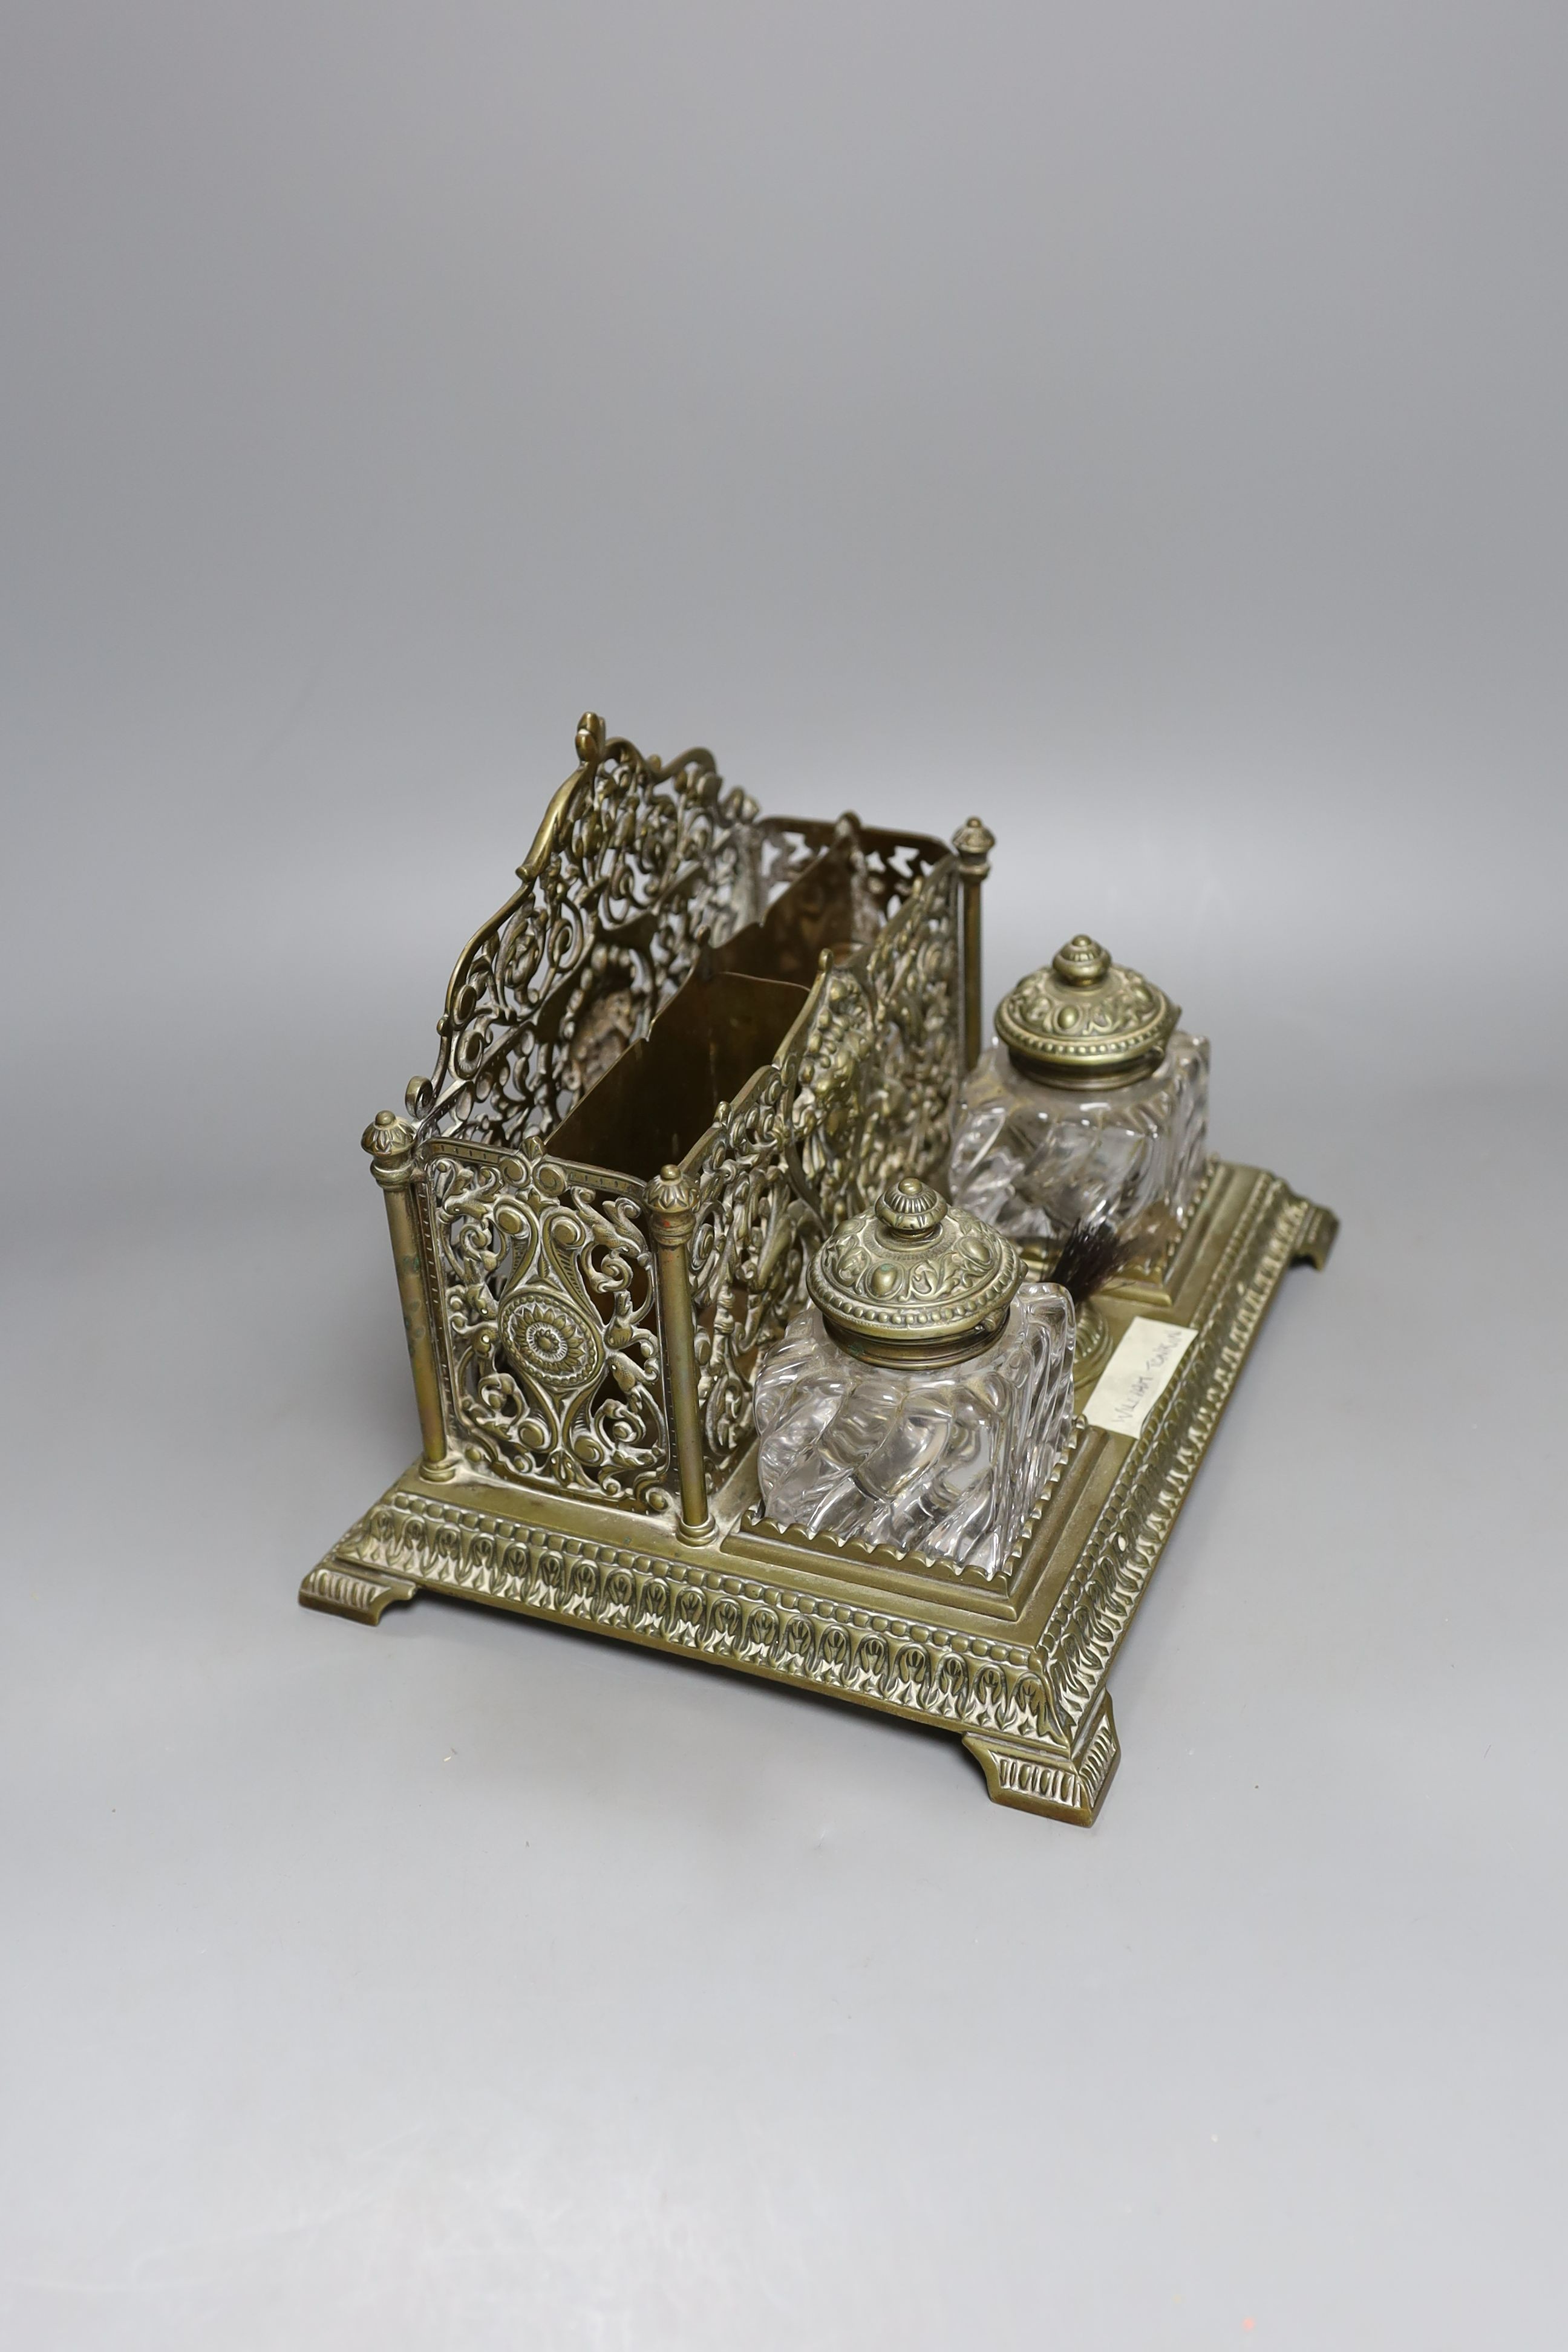 A late 19th century William Tonkin brass 2 bottled ink and letter stand - 27cm long